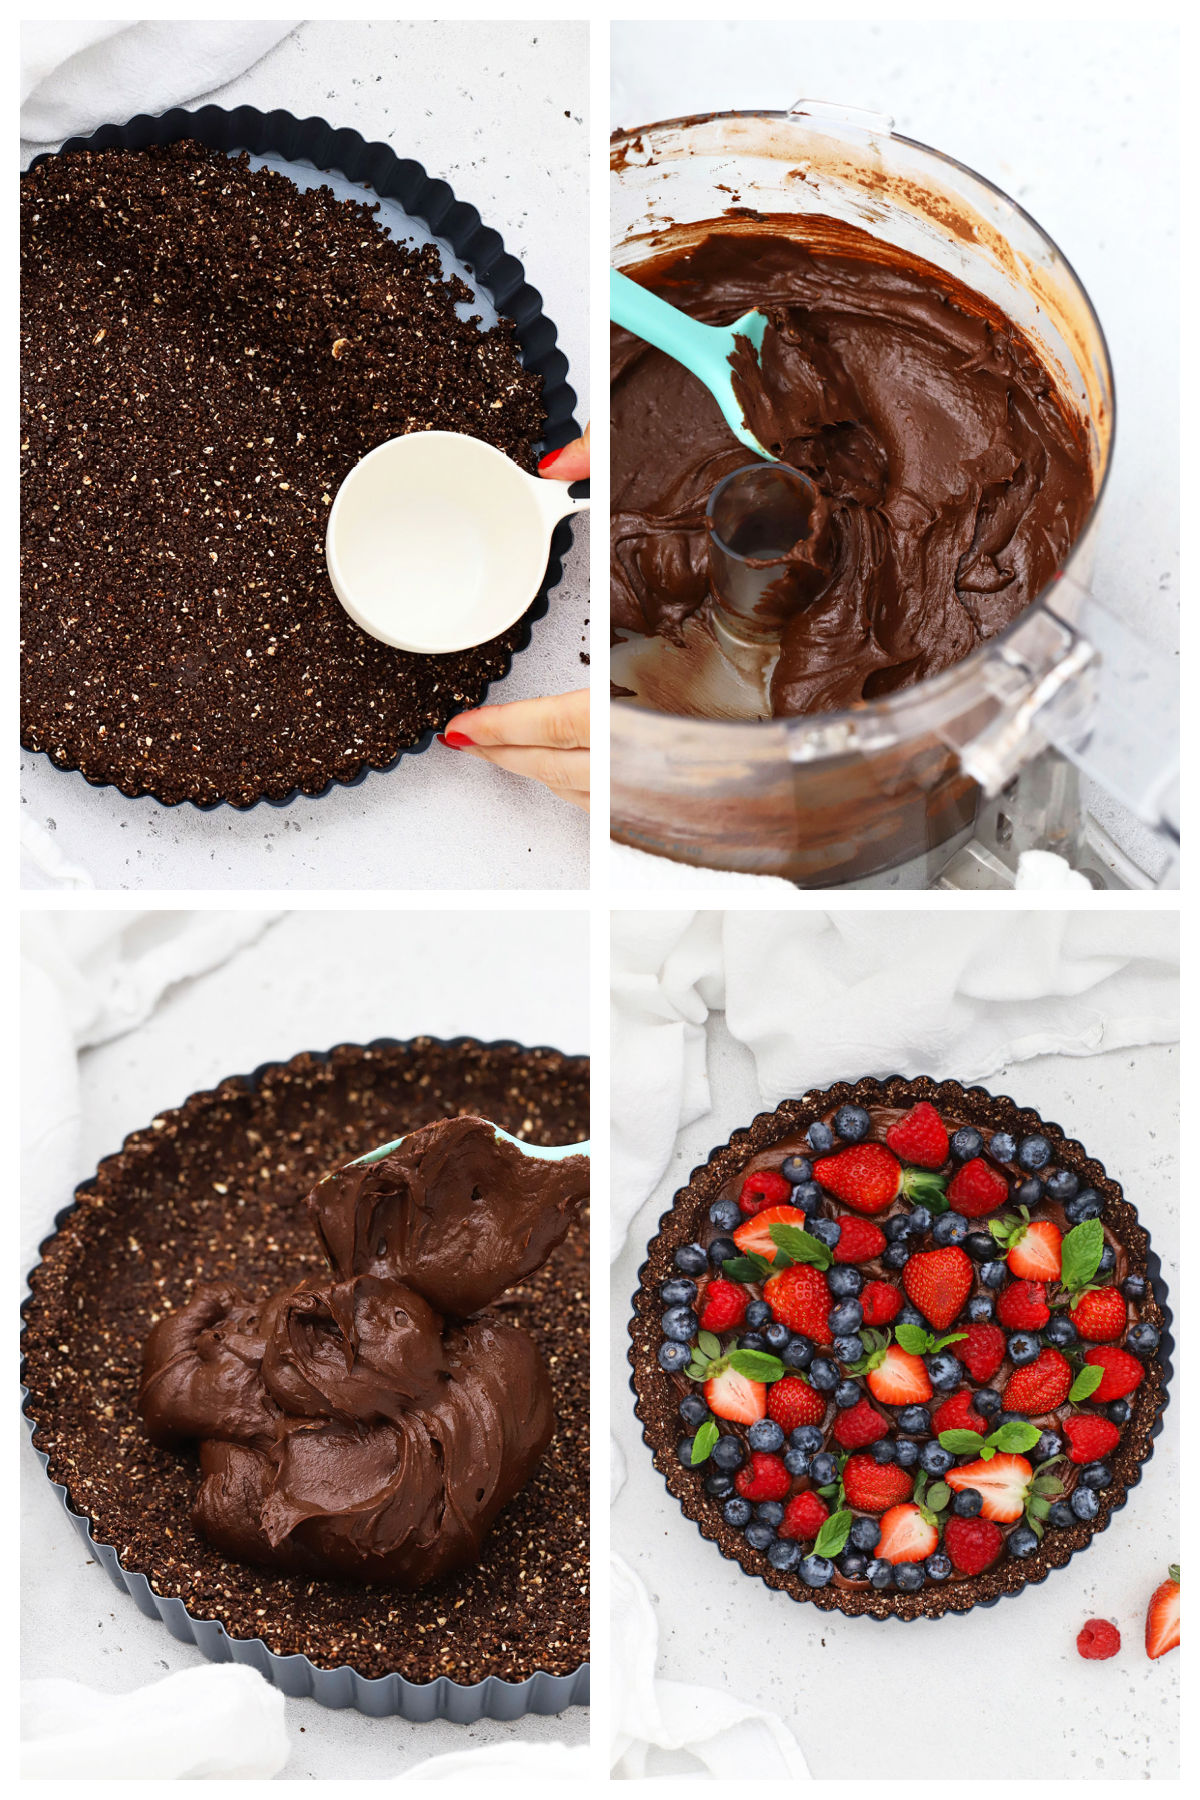 Making chocolate berry tart step by step